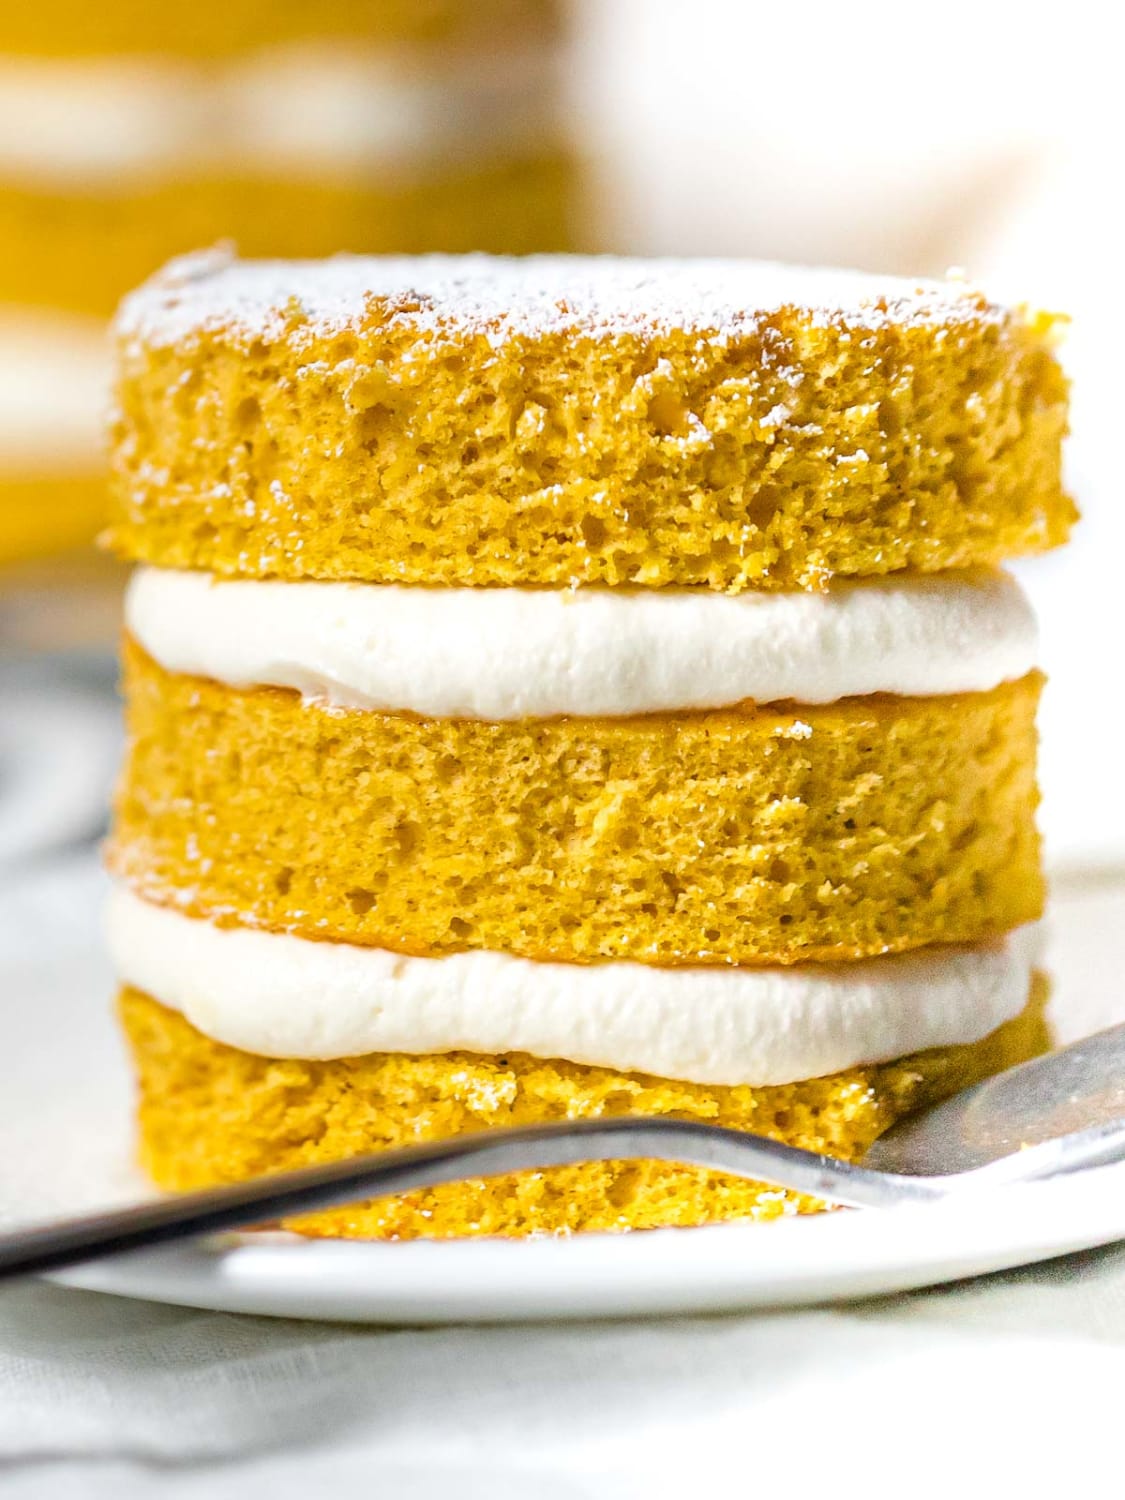 Delicious Mini Pumpkin Layer Cakes - Soft and Fluffy!